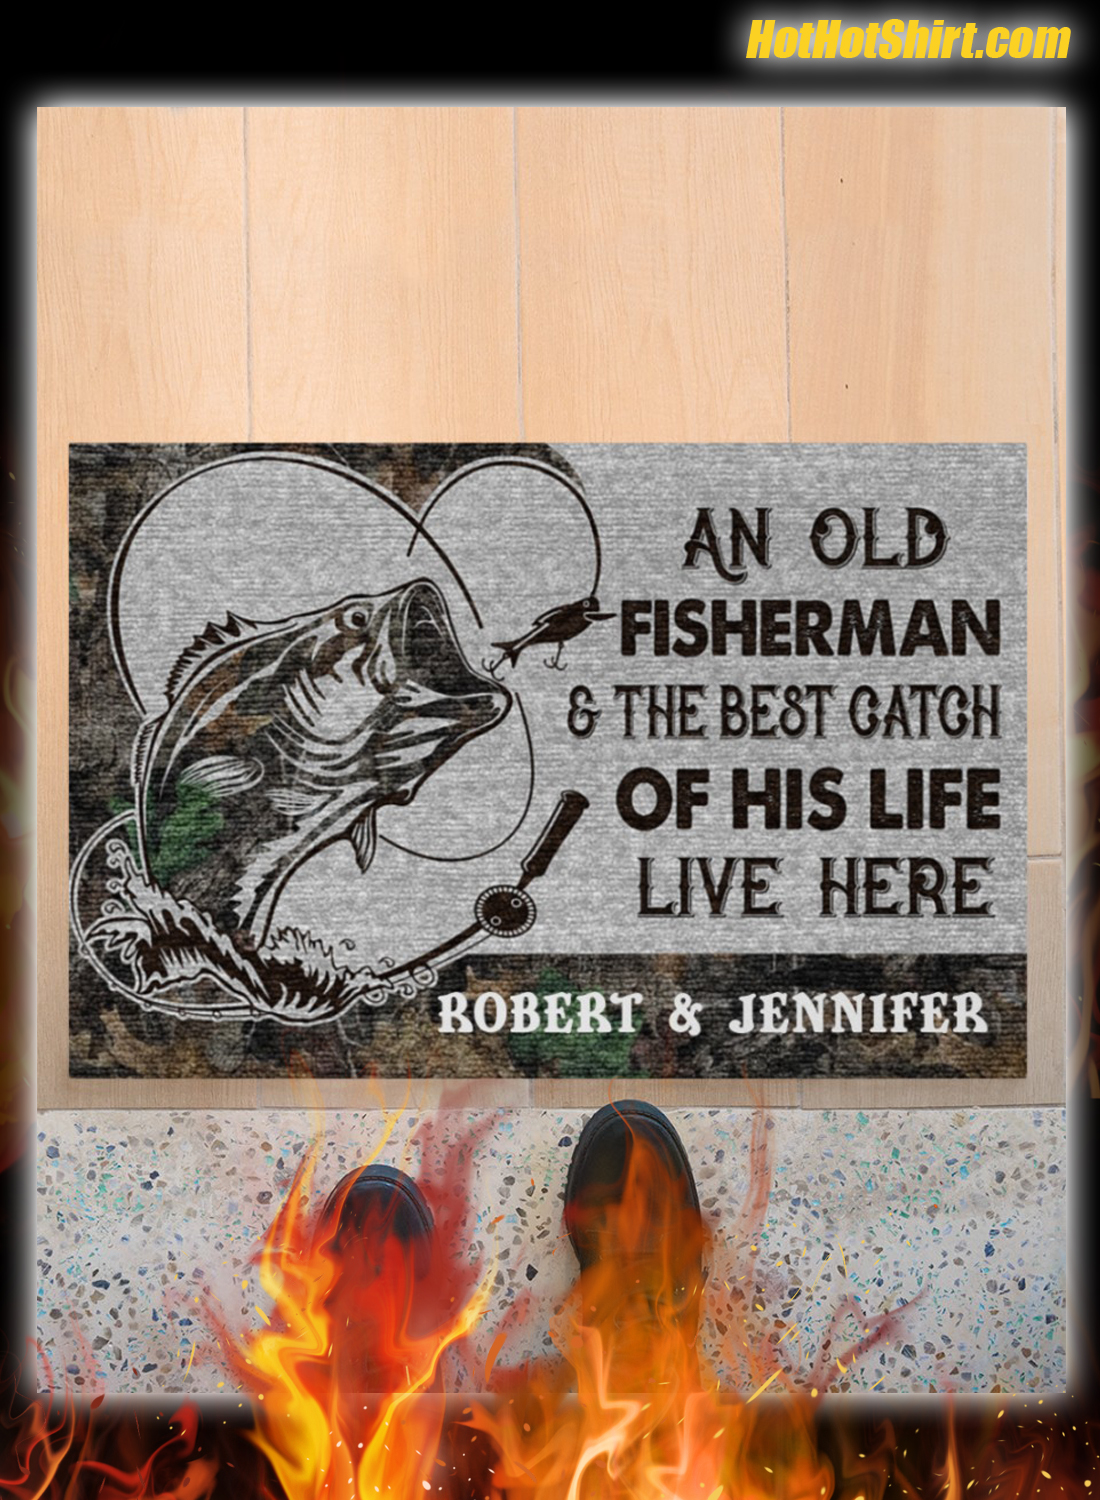 Personalized Name An Old Fisherman And The Best Catch Of His Life Here Doormat